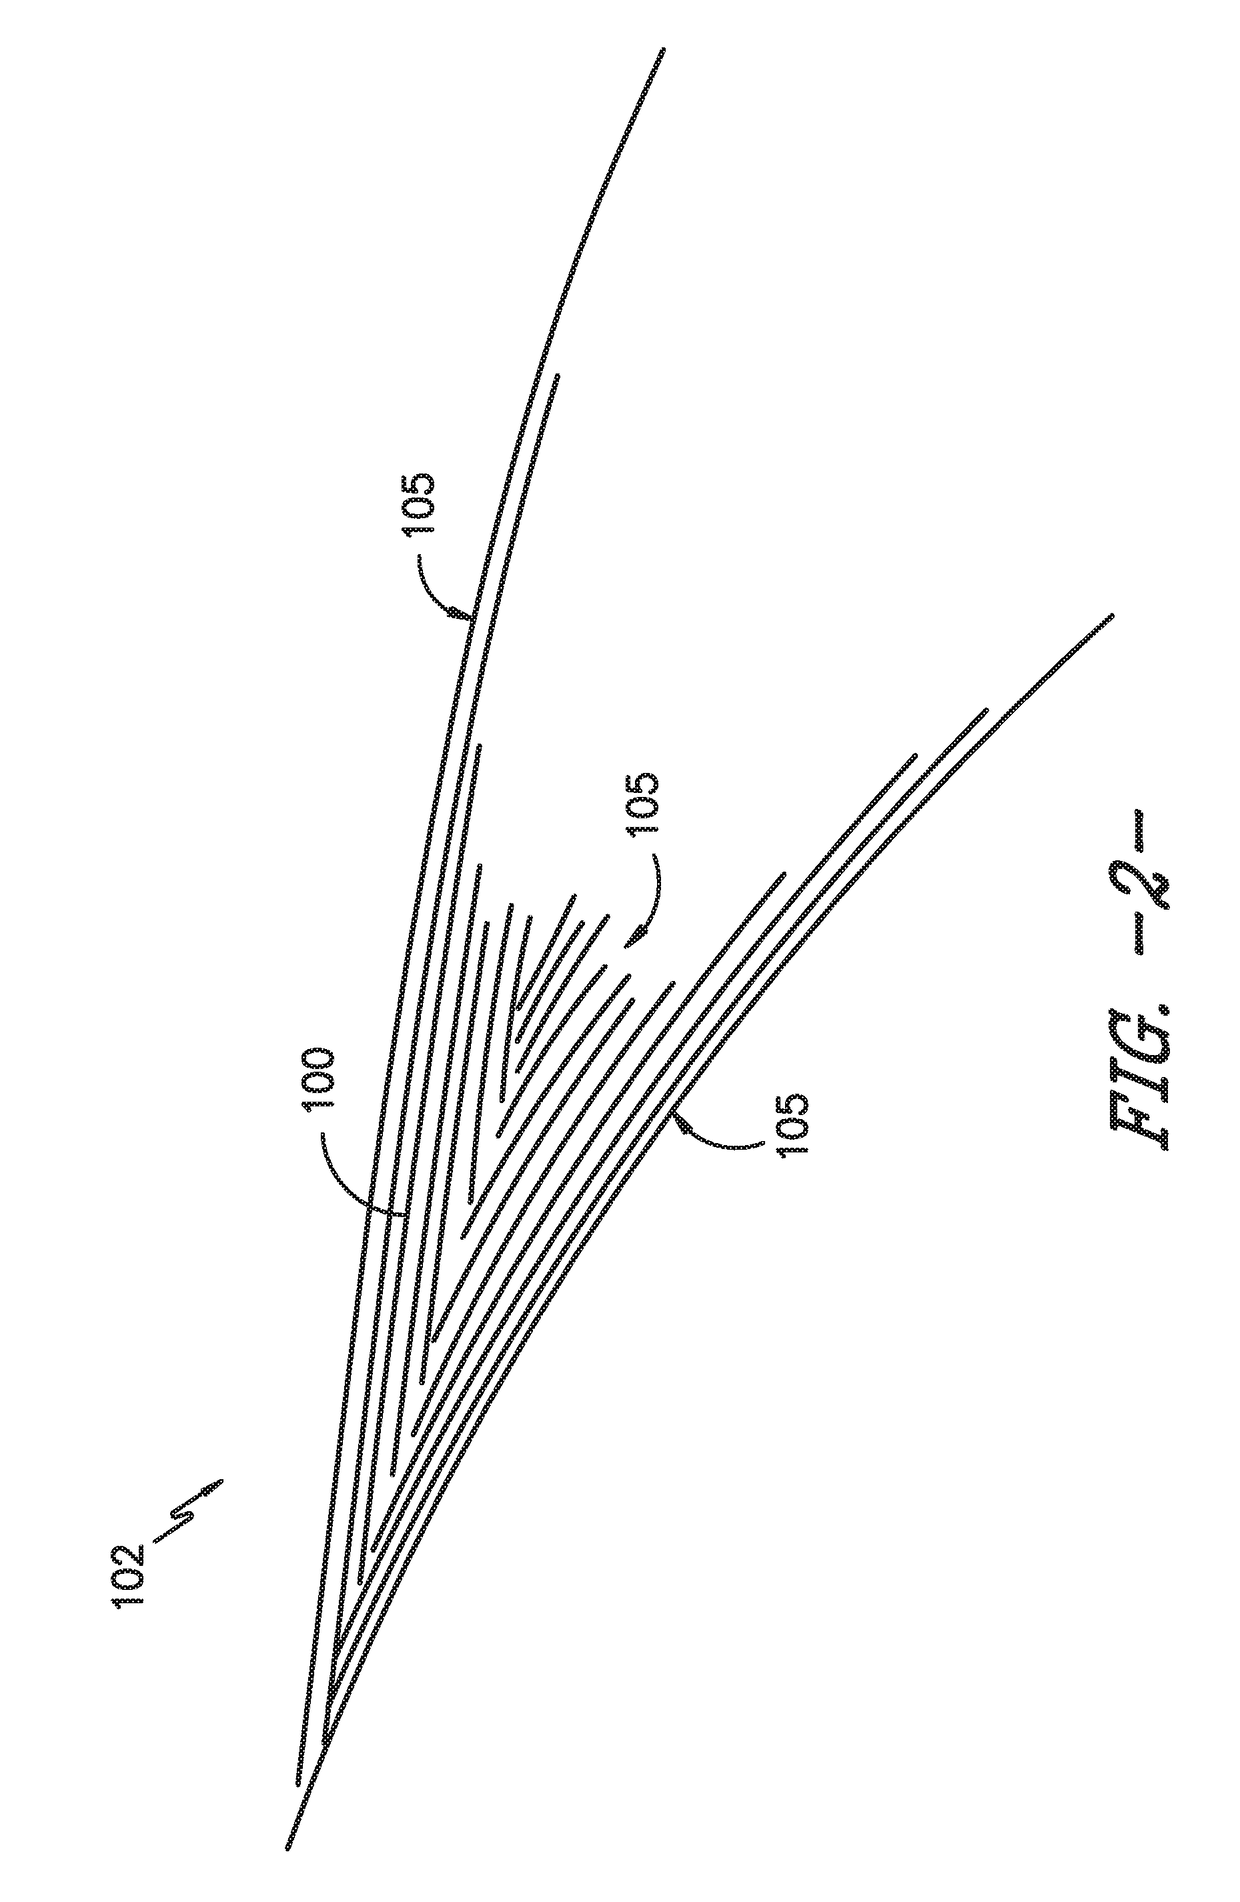 Shaped composite ply layups and methods for shaping composite ply layups